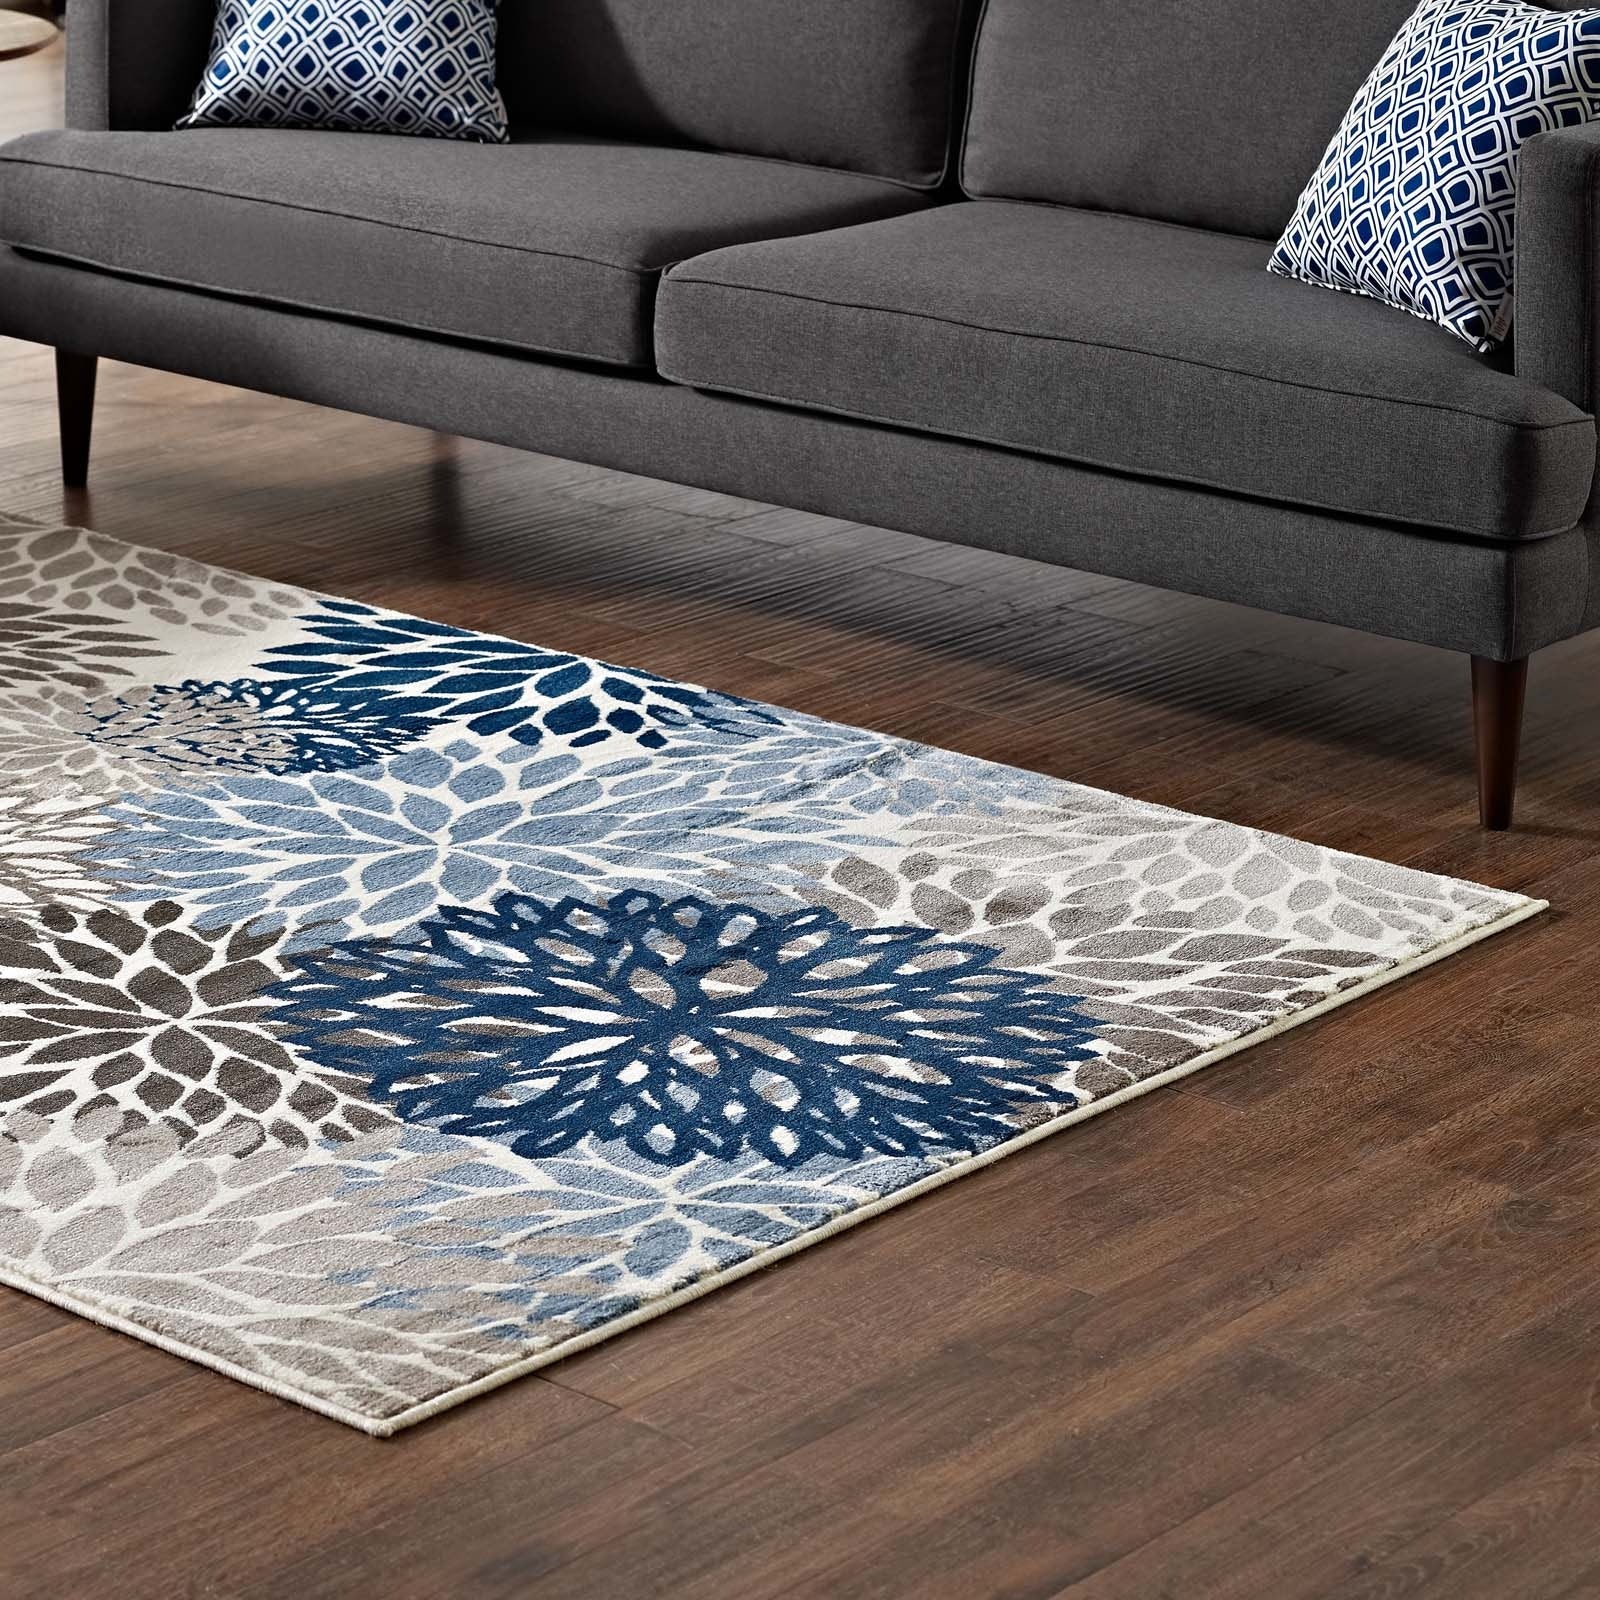 Calithea Vintage Classic Abstract Floral 8x10 Area Rug Blue